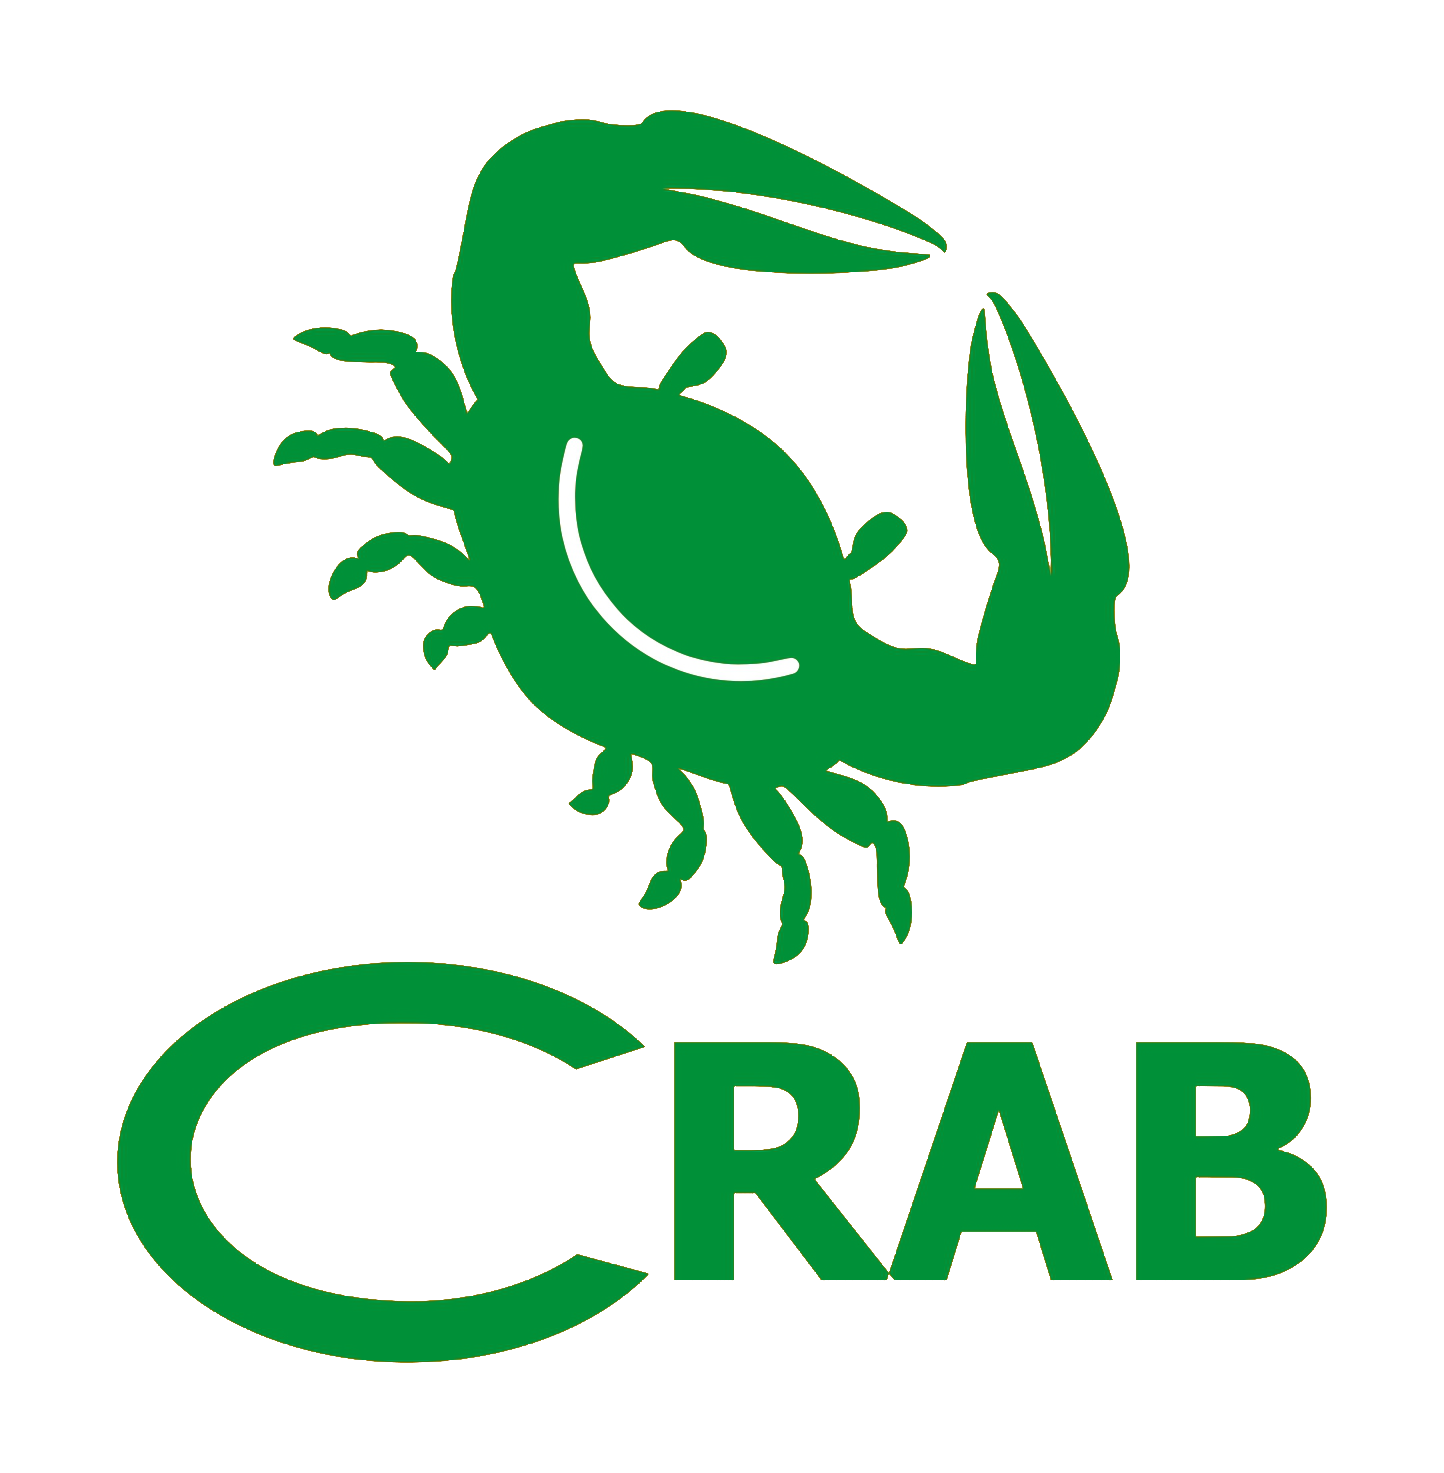 Stacje Paliw CRAB